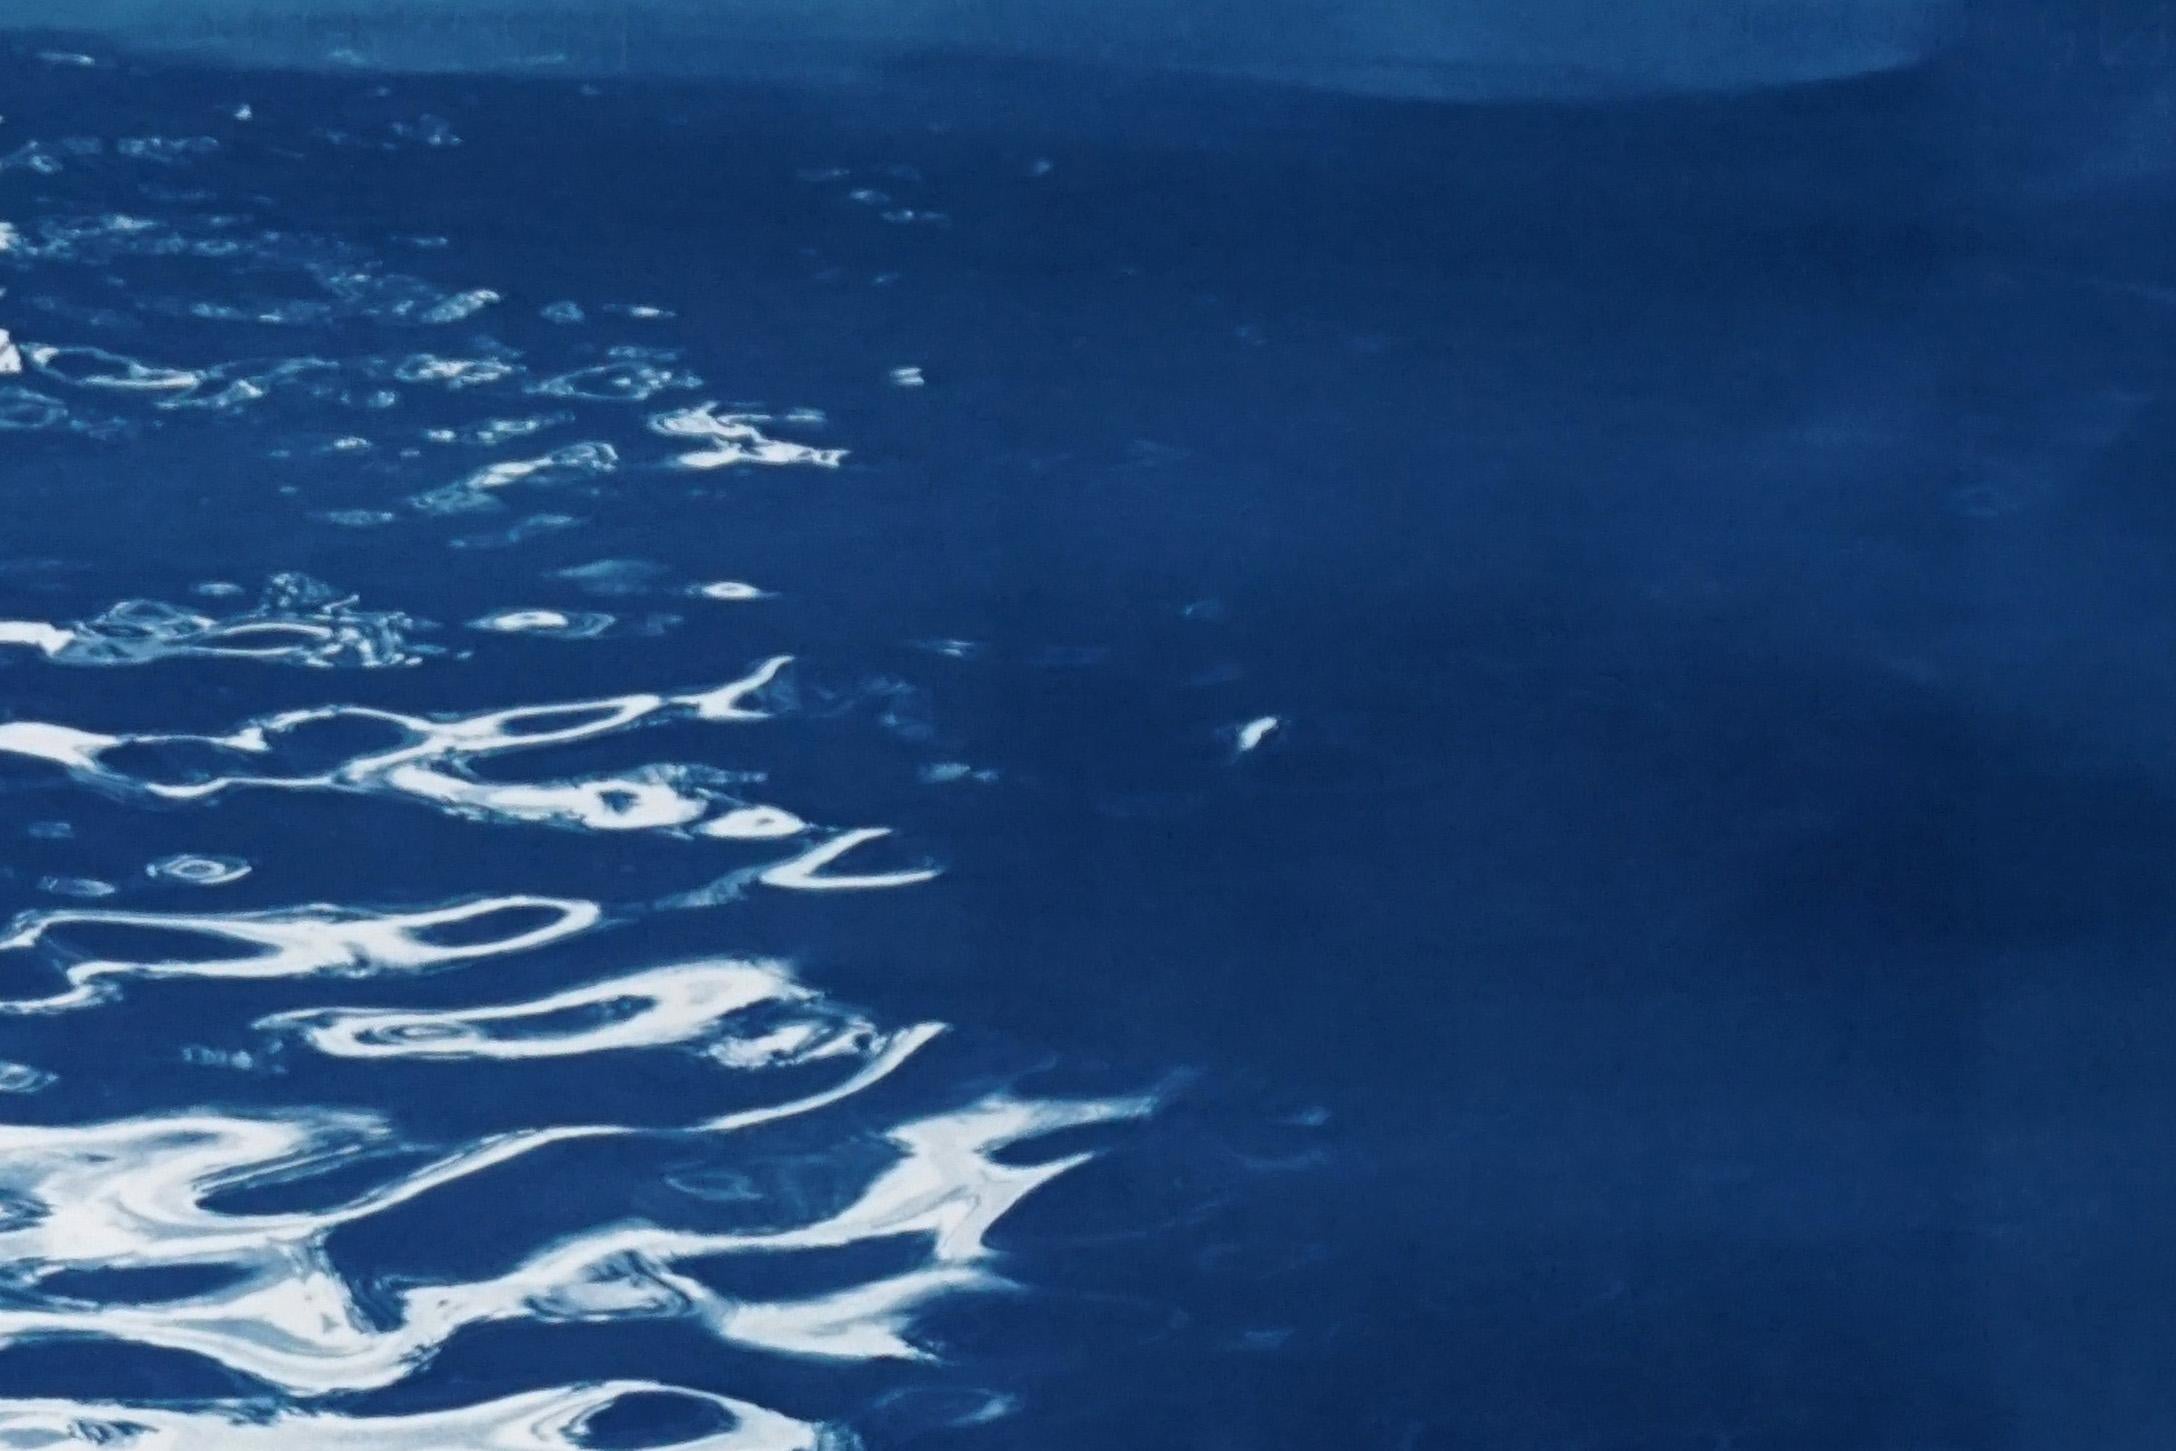 Nocturnal Seascape, Black Sea, Nautical Cyanotype Print on Paper, Deep Navy Blue For Sale 1